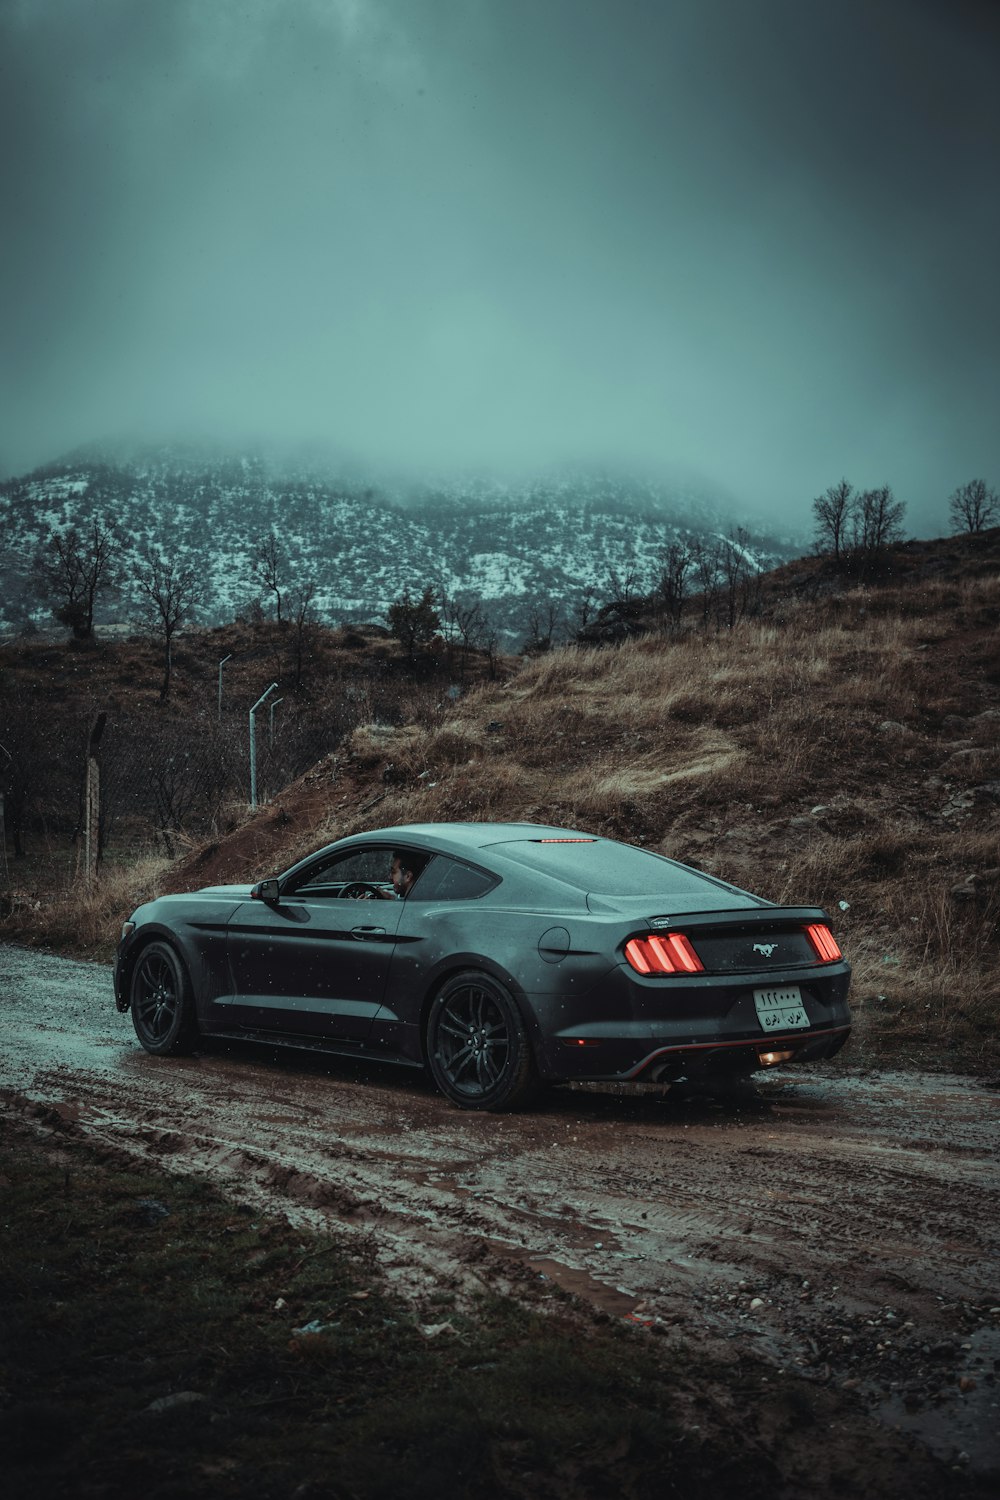 a black sports car parked on a dirt road